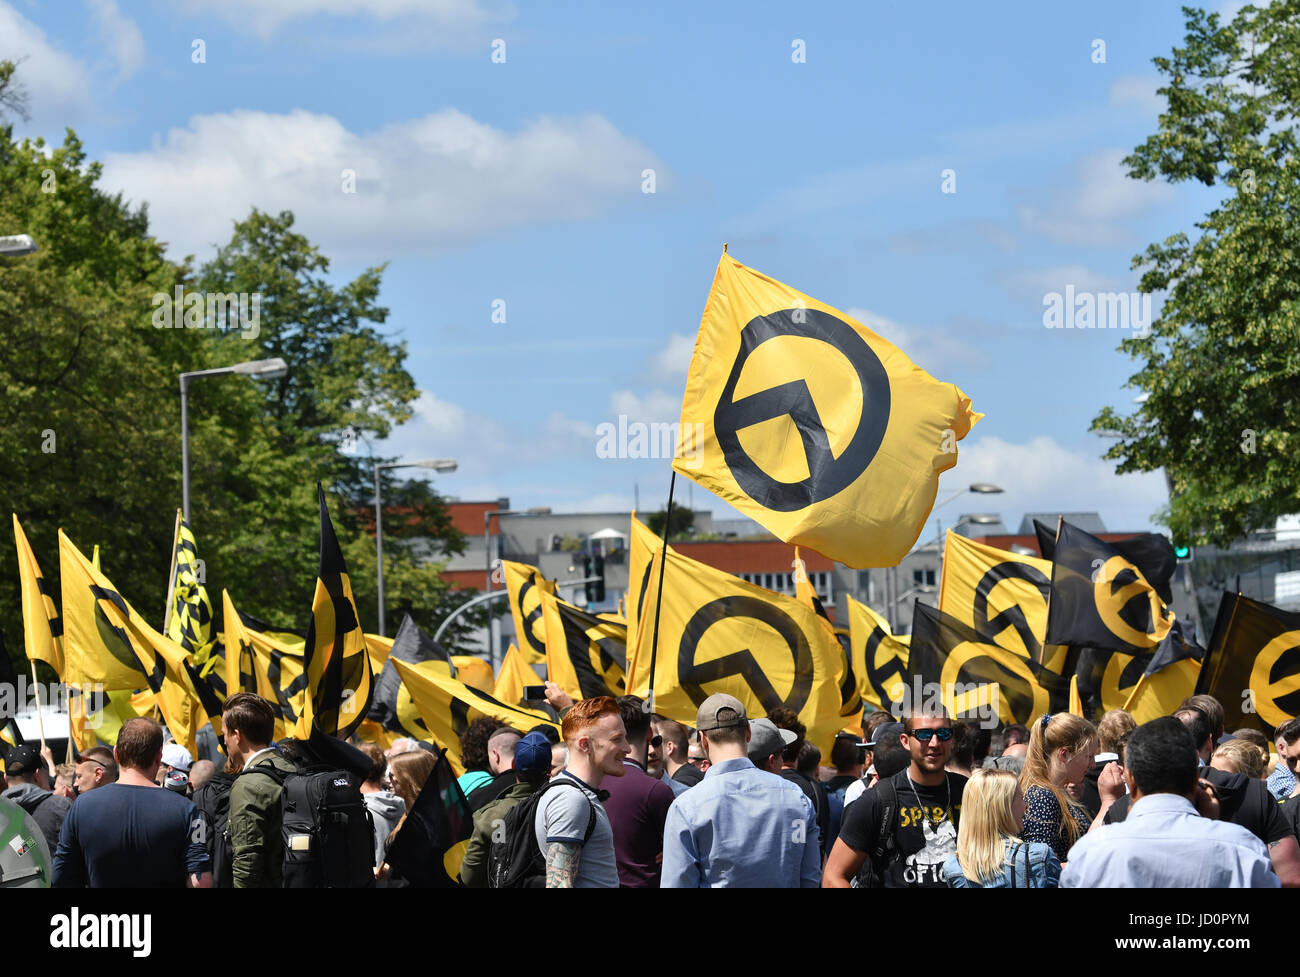 Berlin, Germany. 17th June, 2017. Supporters of the right-wing 'Identitaere Bewegung' (lit. identitarian movement) on Brunnenstrasse in Berlin, Germany, 17 June 2017. Various groups protested against a demonstration by the right-wing group. Photo: Paul Zinken/dpa/Alamy Live News Stock Photo